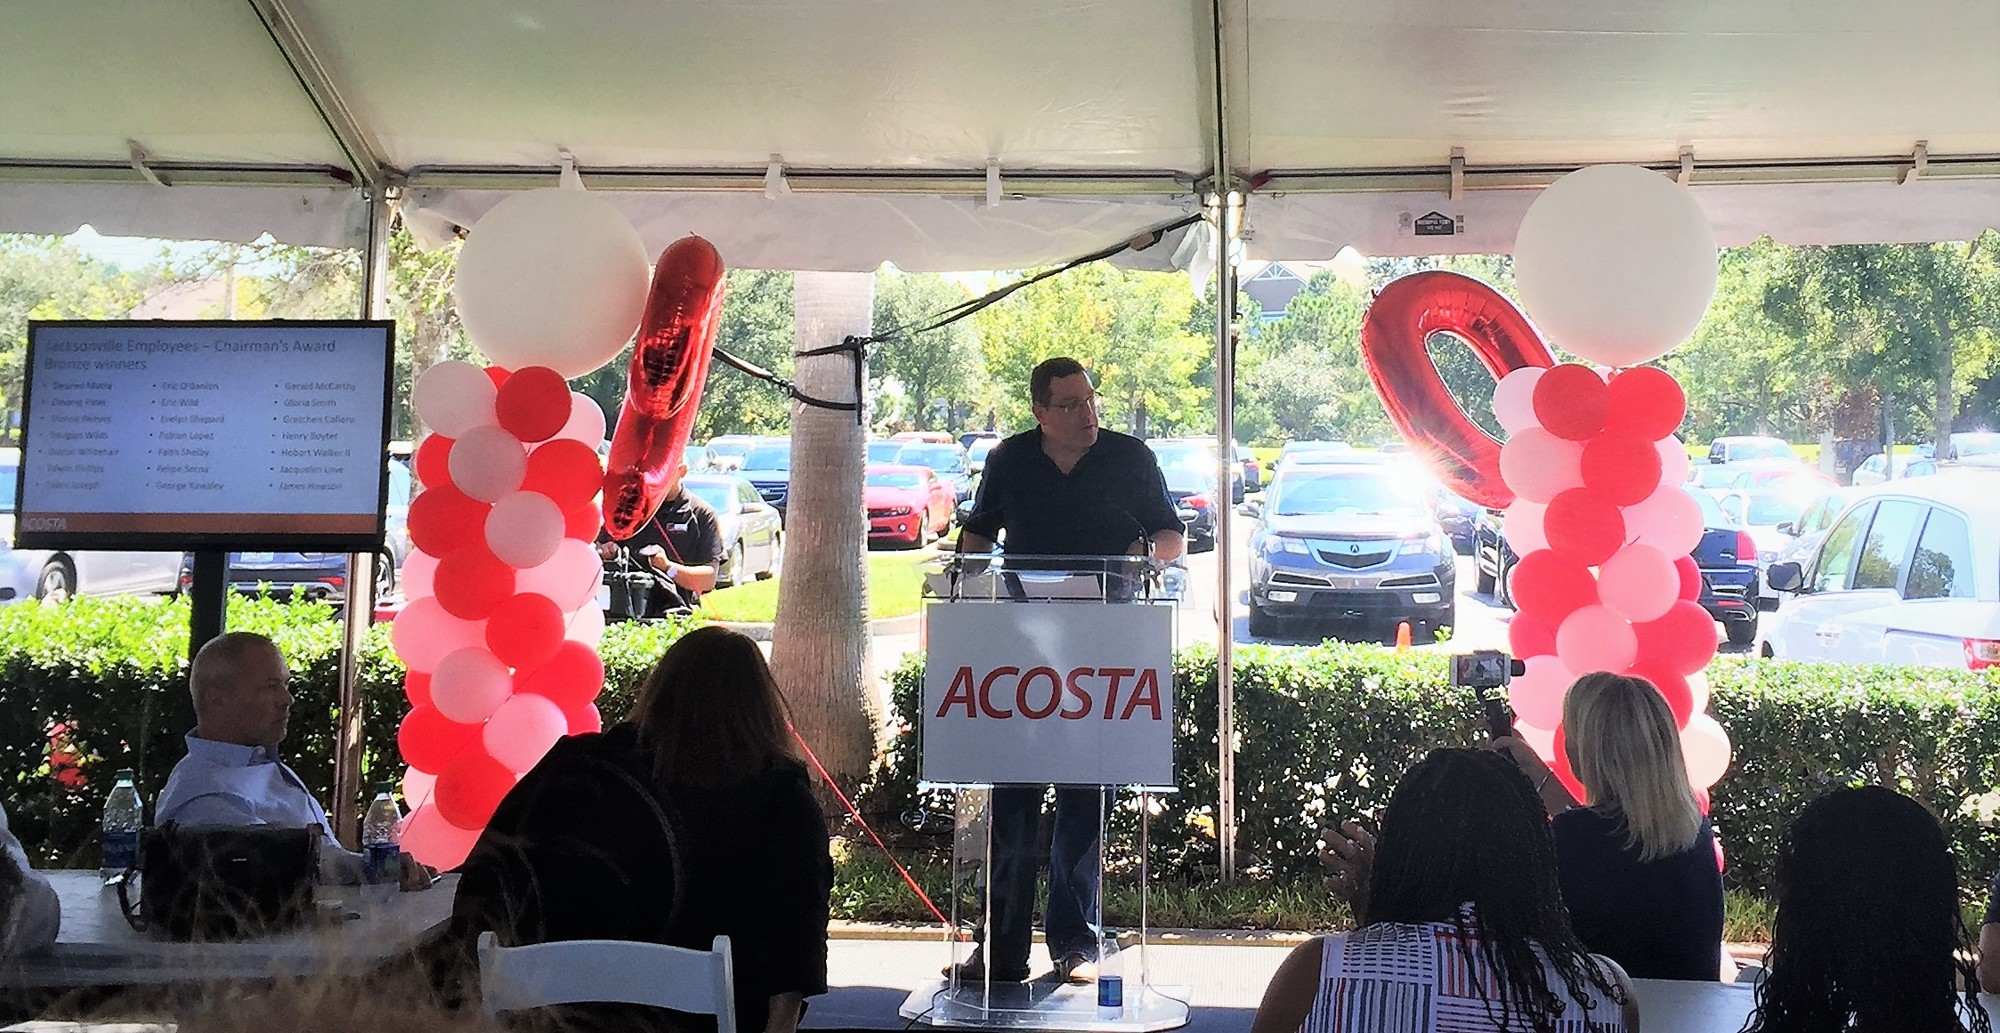 Acosta President and CEO Steve Matthesen celebrates the Jacksonville-based company’s 90 years in business.